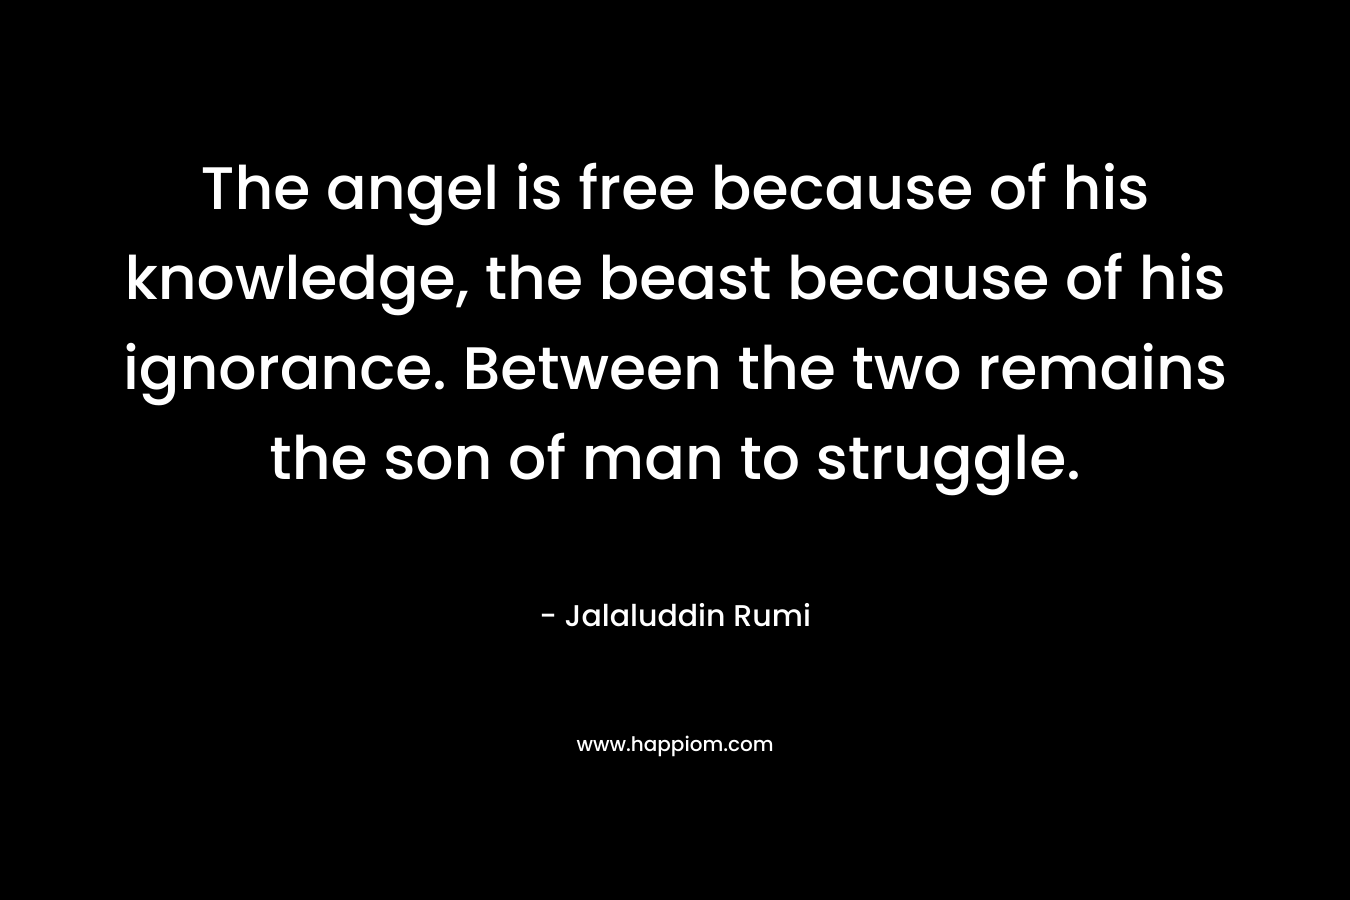 The angel is free because of his knowledge, the beast because of his ignorance. Between the two remains the son of man to struggle. – Jalaluddin Rumi